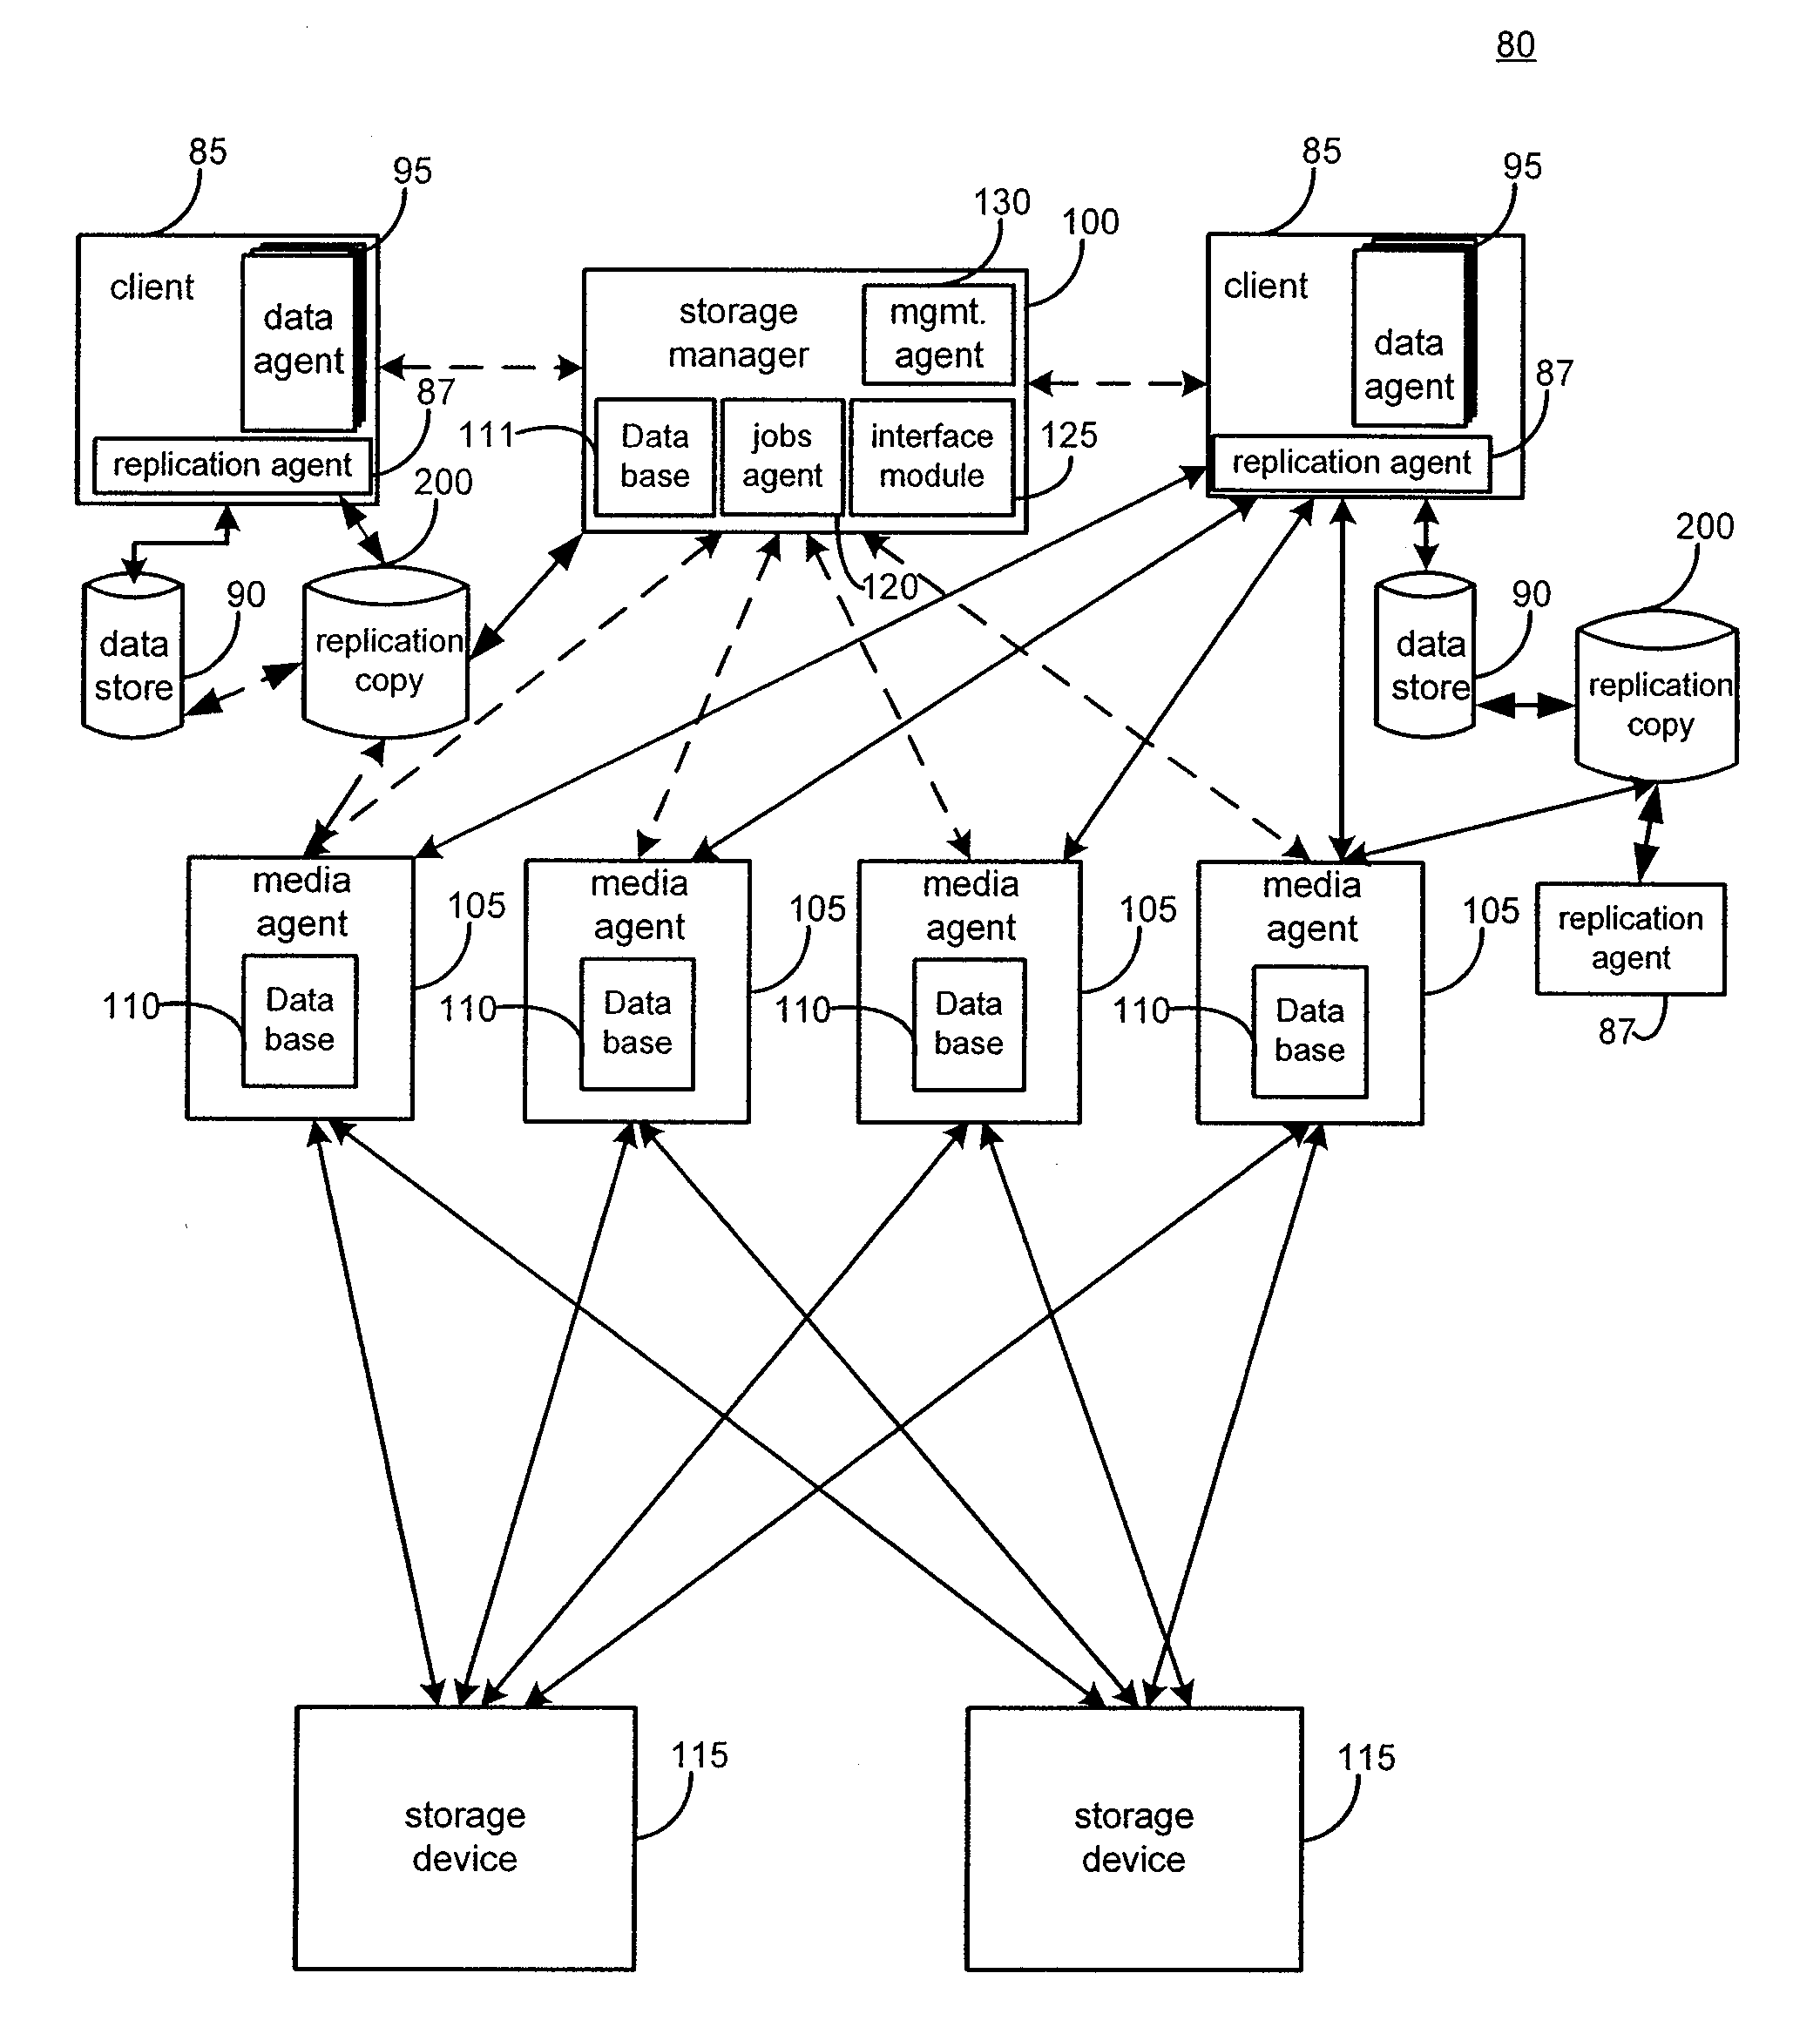 Systems and methods for performing replication copy storage operations